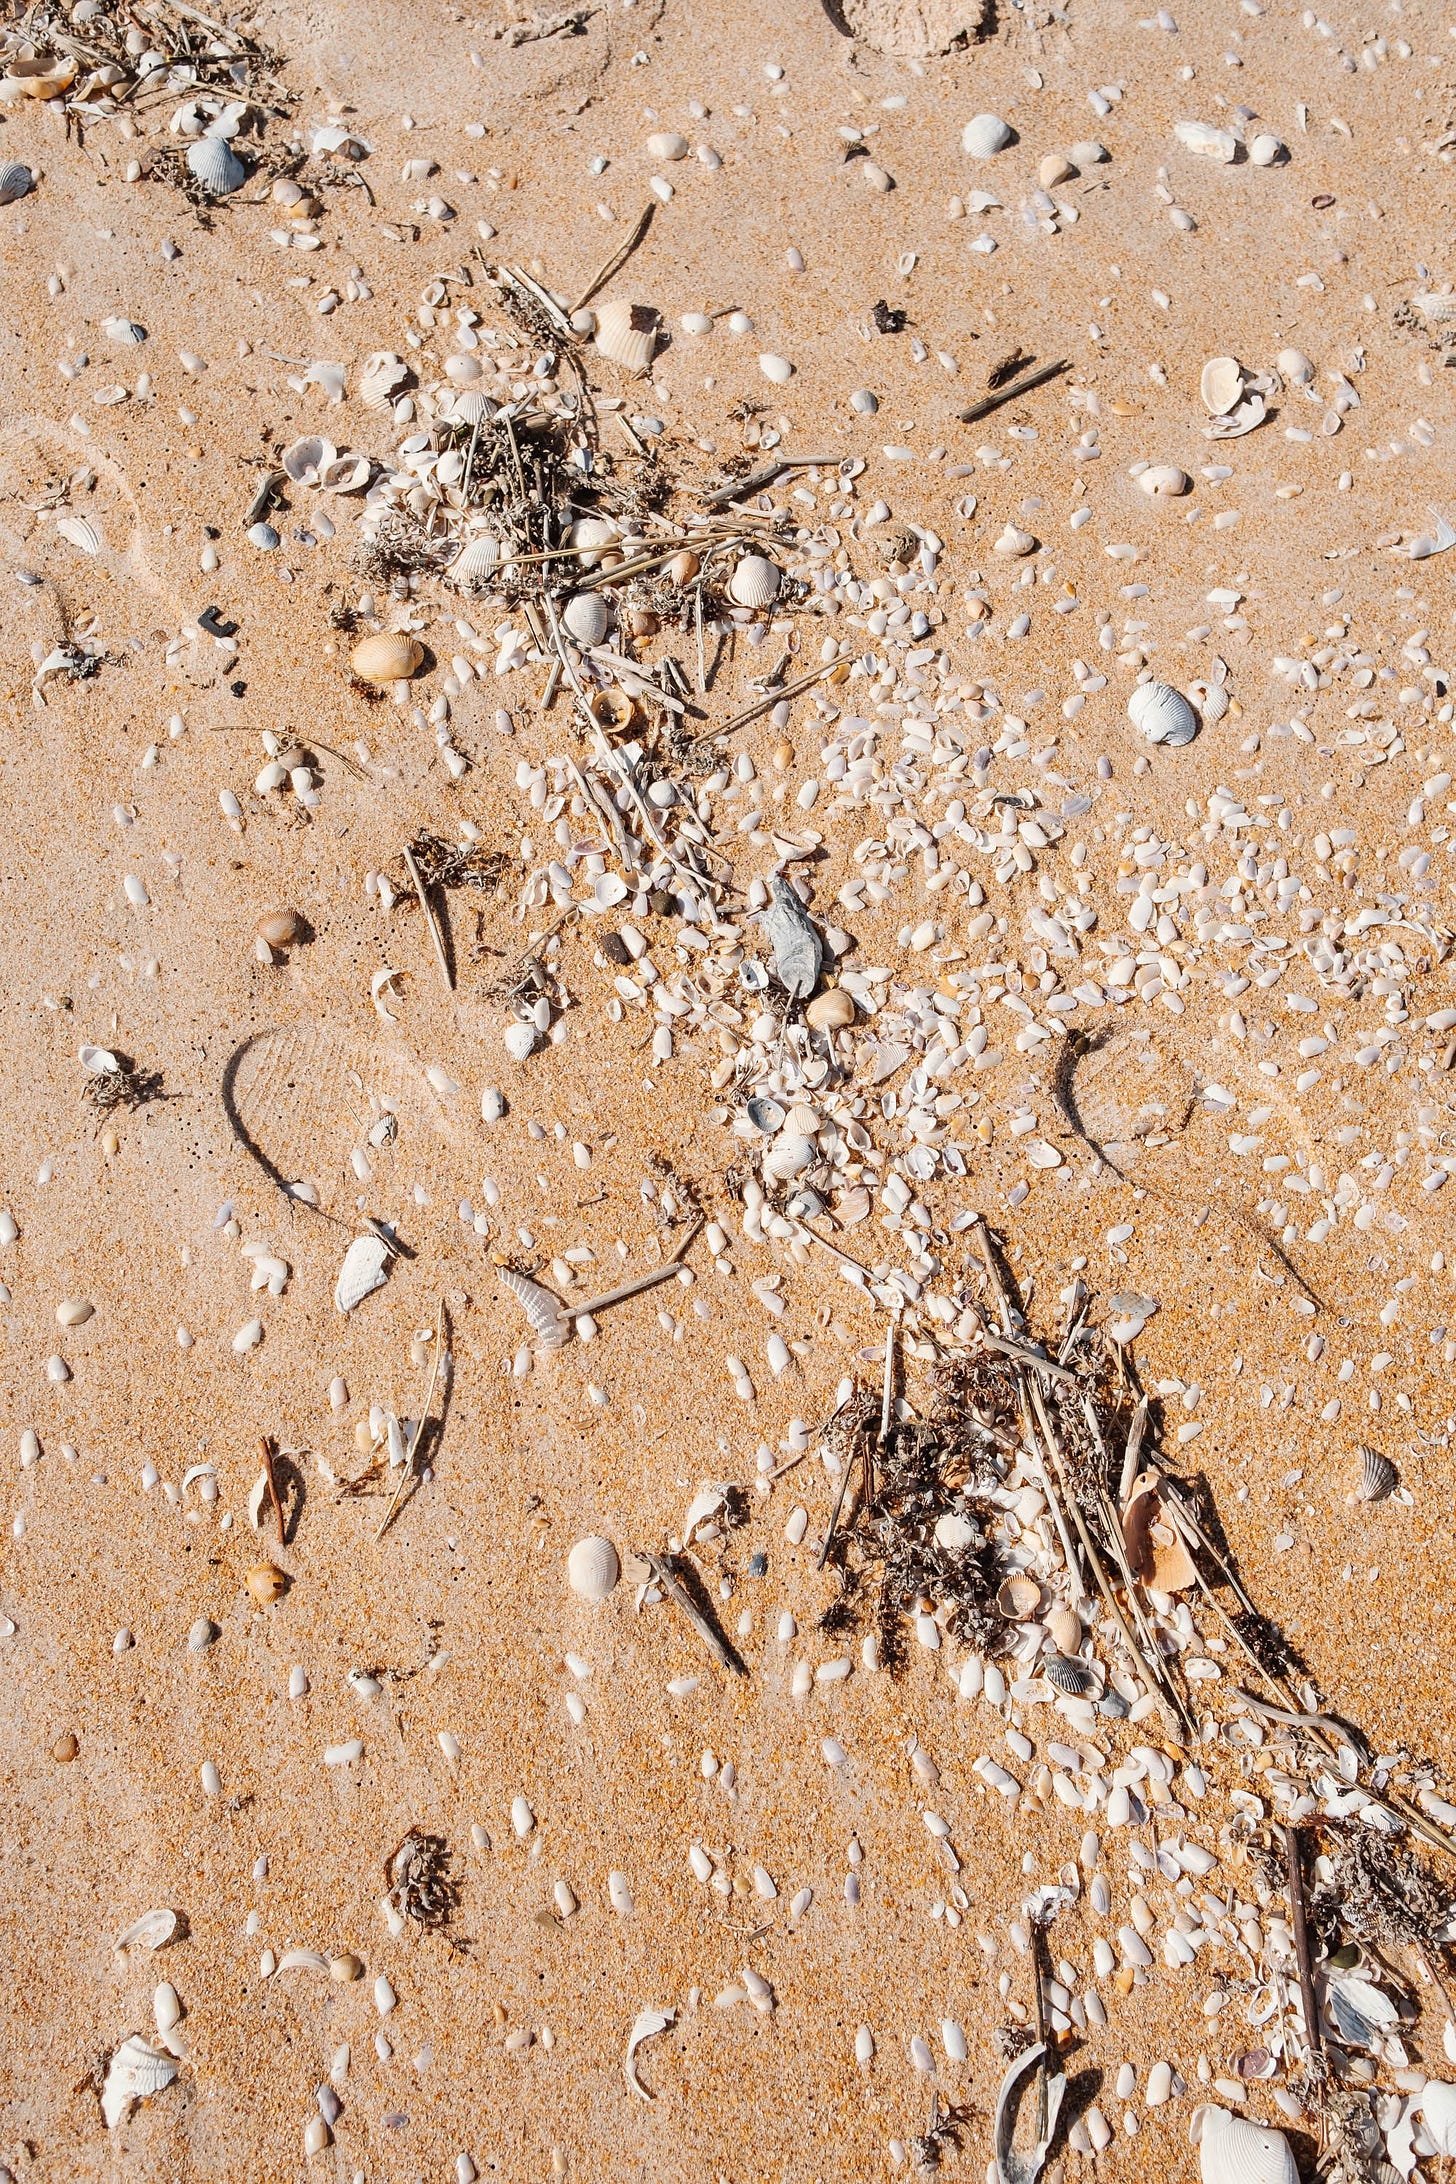 Textures of sand and shells and other washed-up bits and pieces on a beach. It is a sunny day.